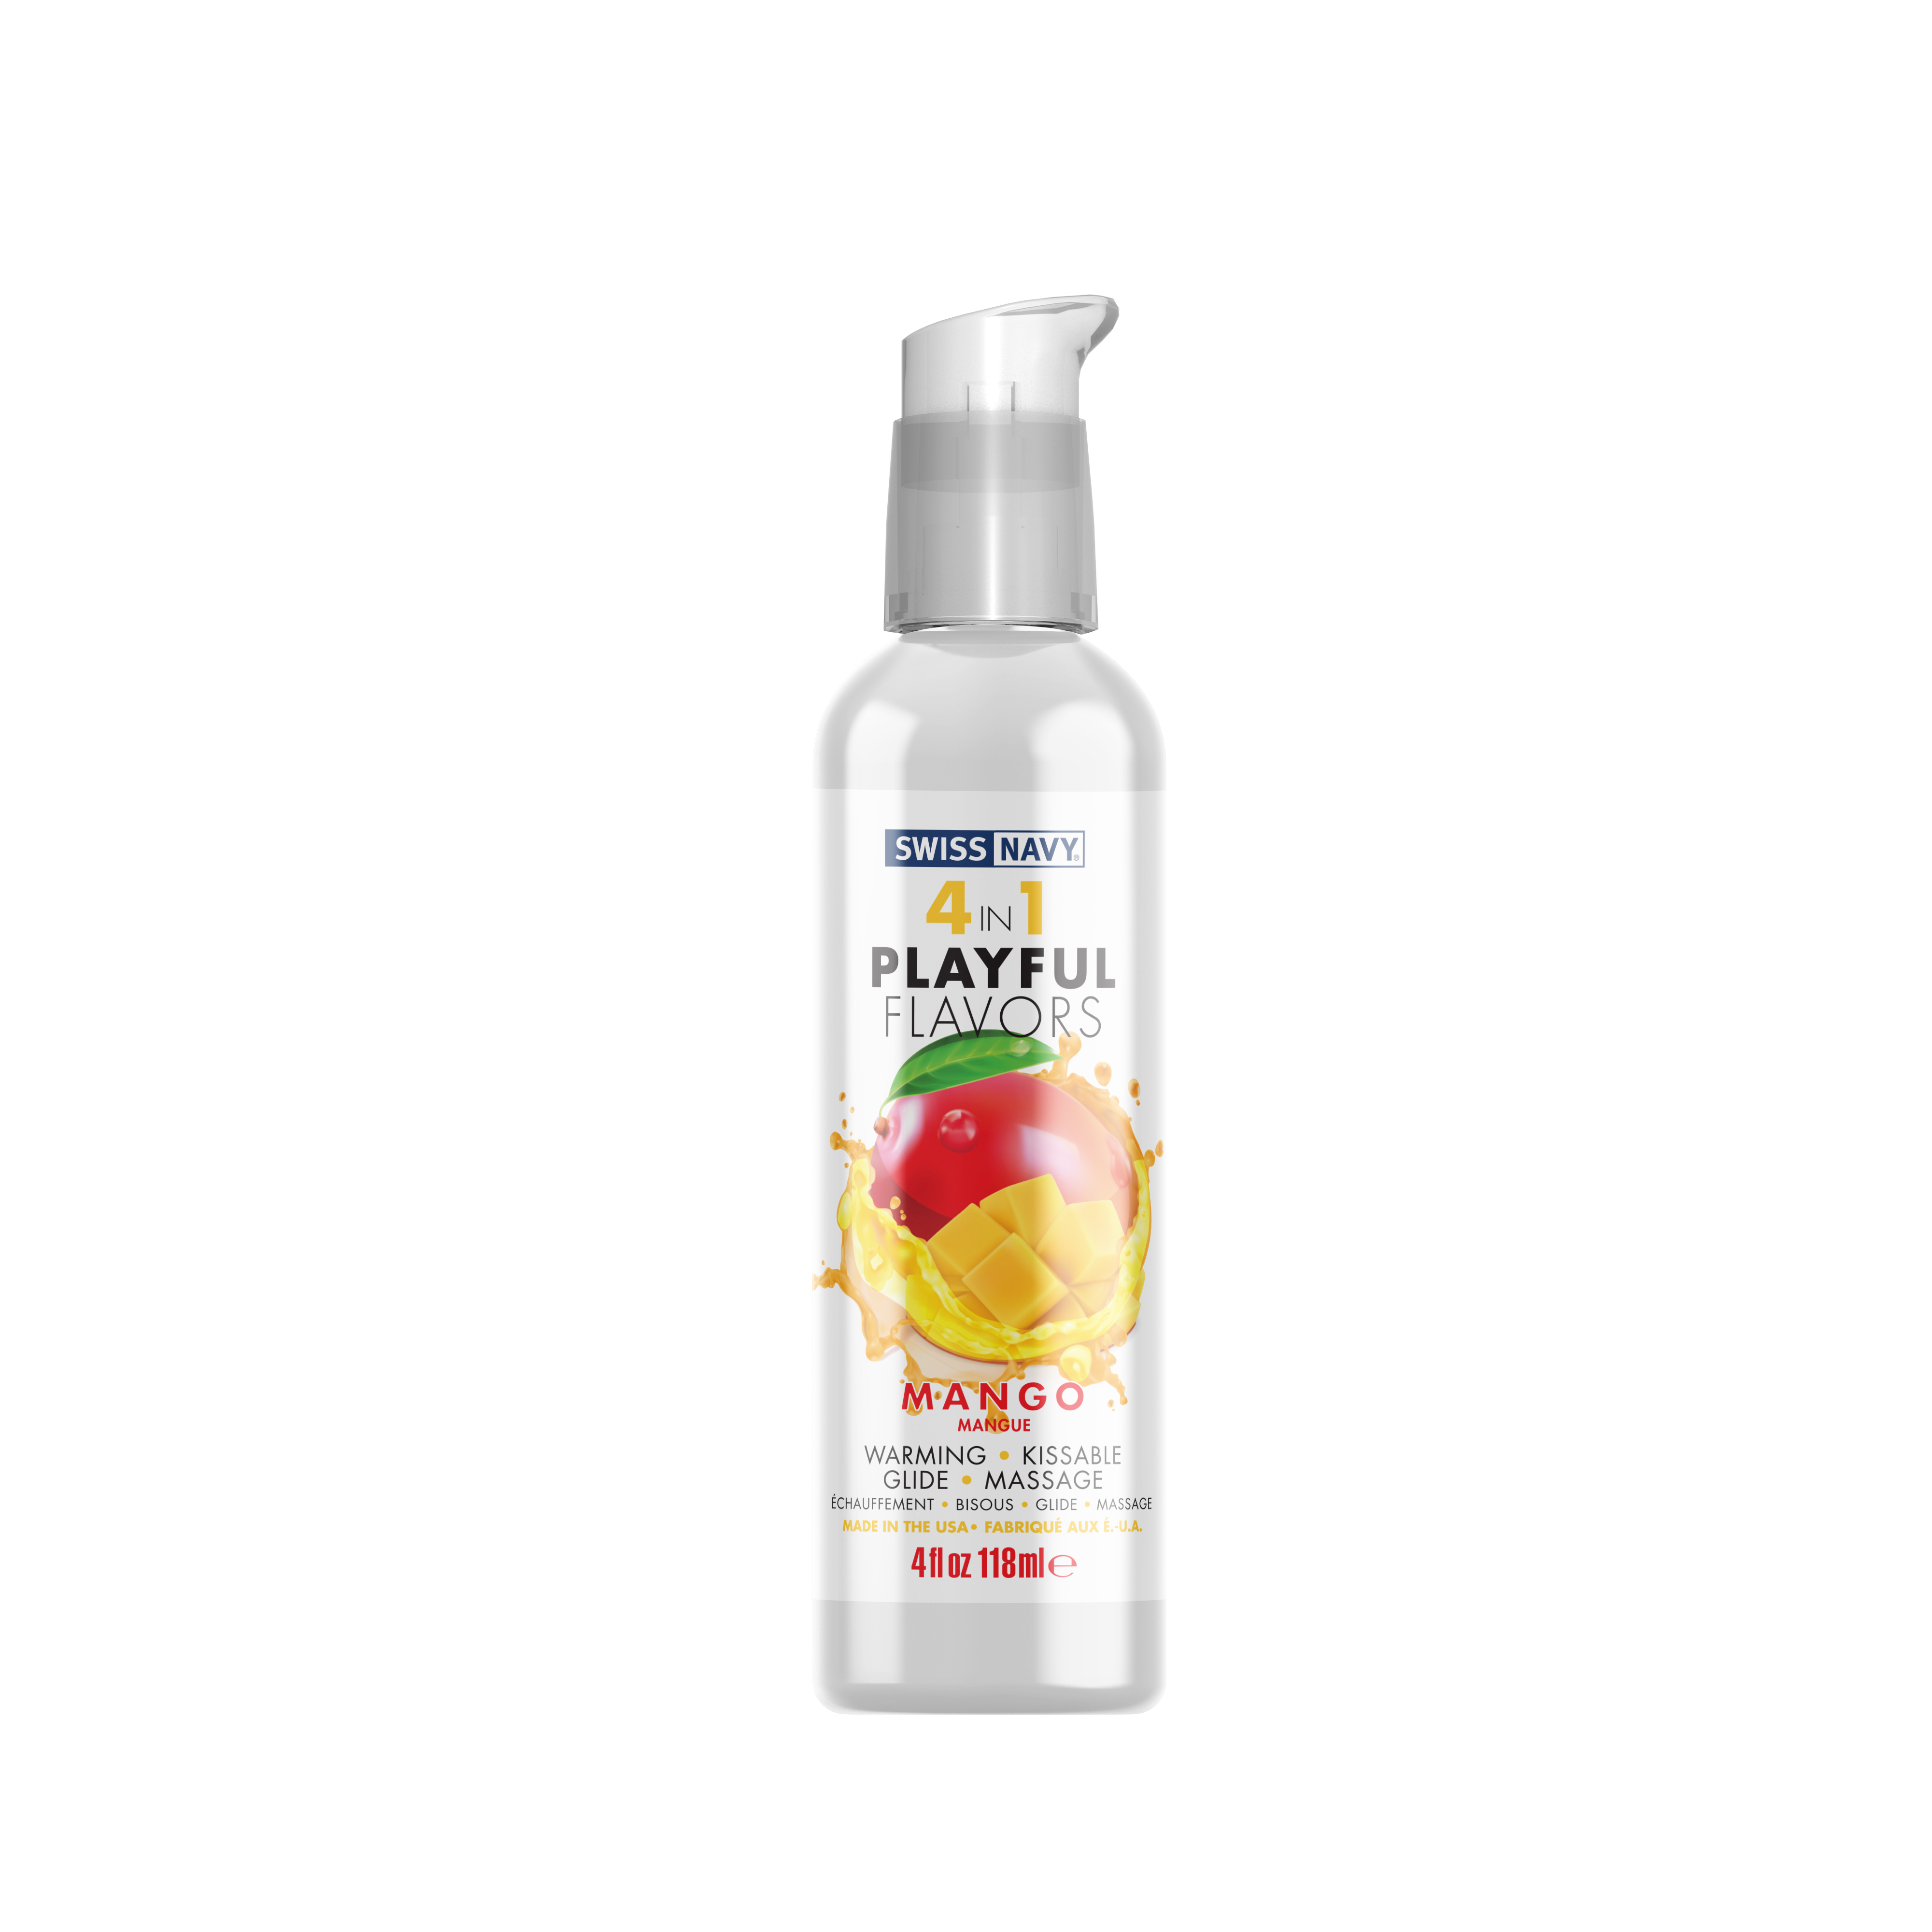 SWISS NAVY 4 IN 1 PLAYFUL FLAVORS MANGO 4 OZ - Click Image to Close